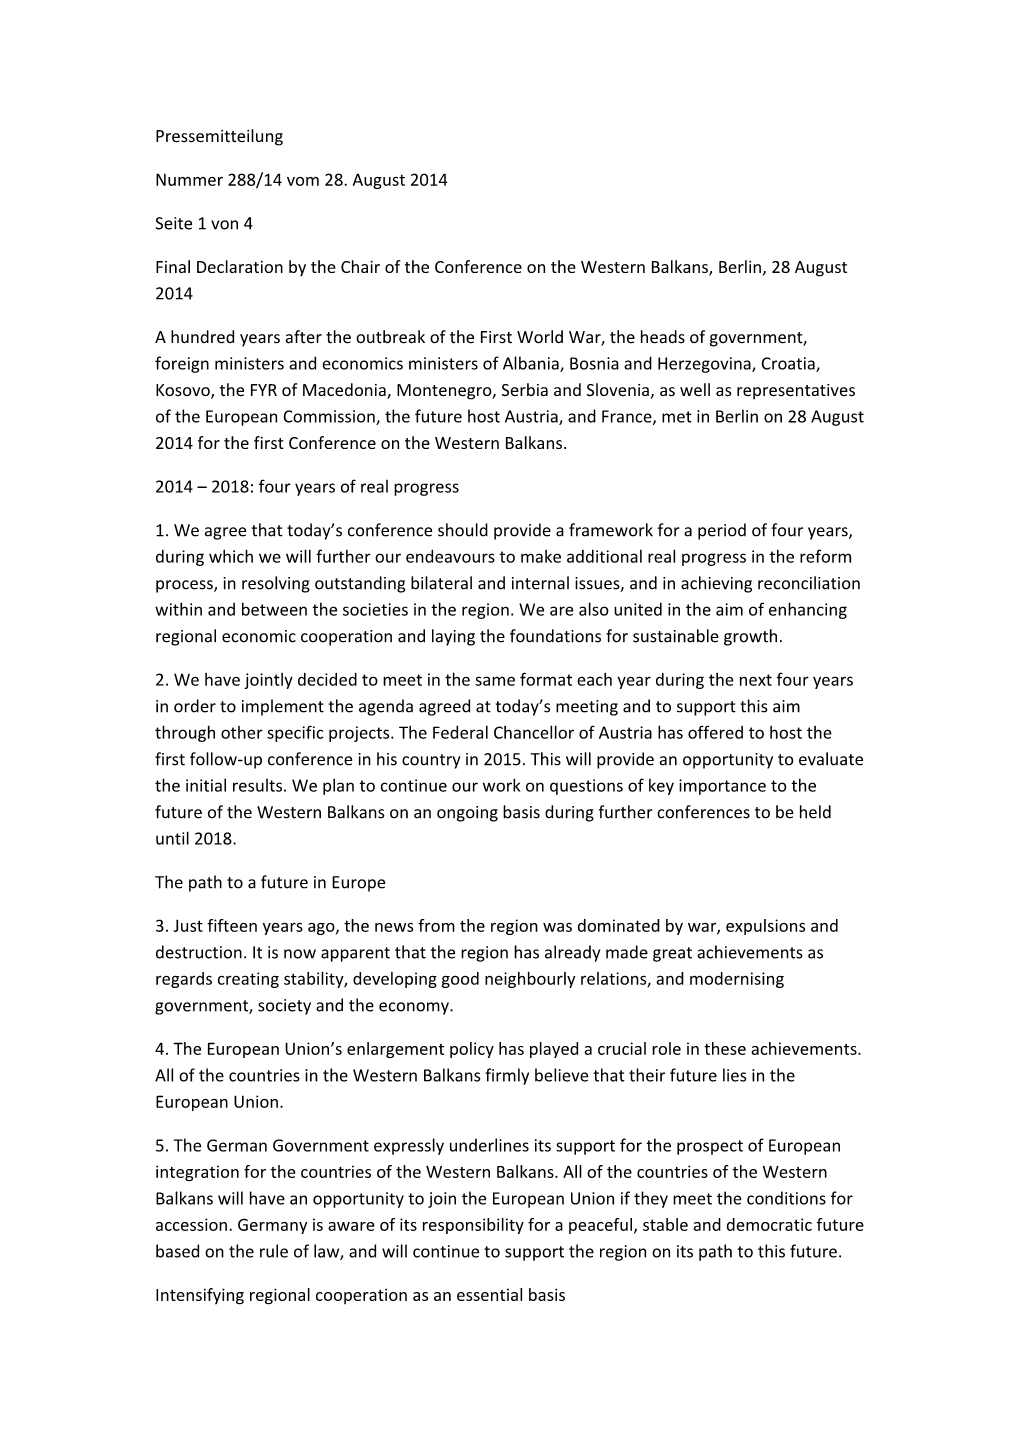 Final Declaration by the Chair of the Conference on the Western Balkans, Berlin, 28 August 2014